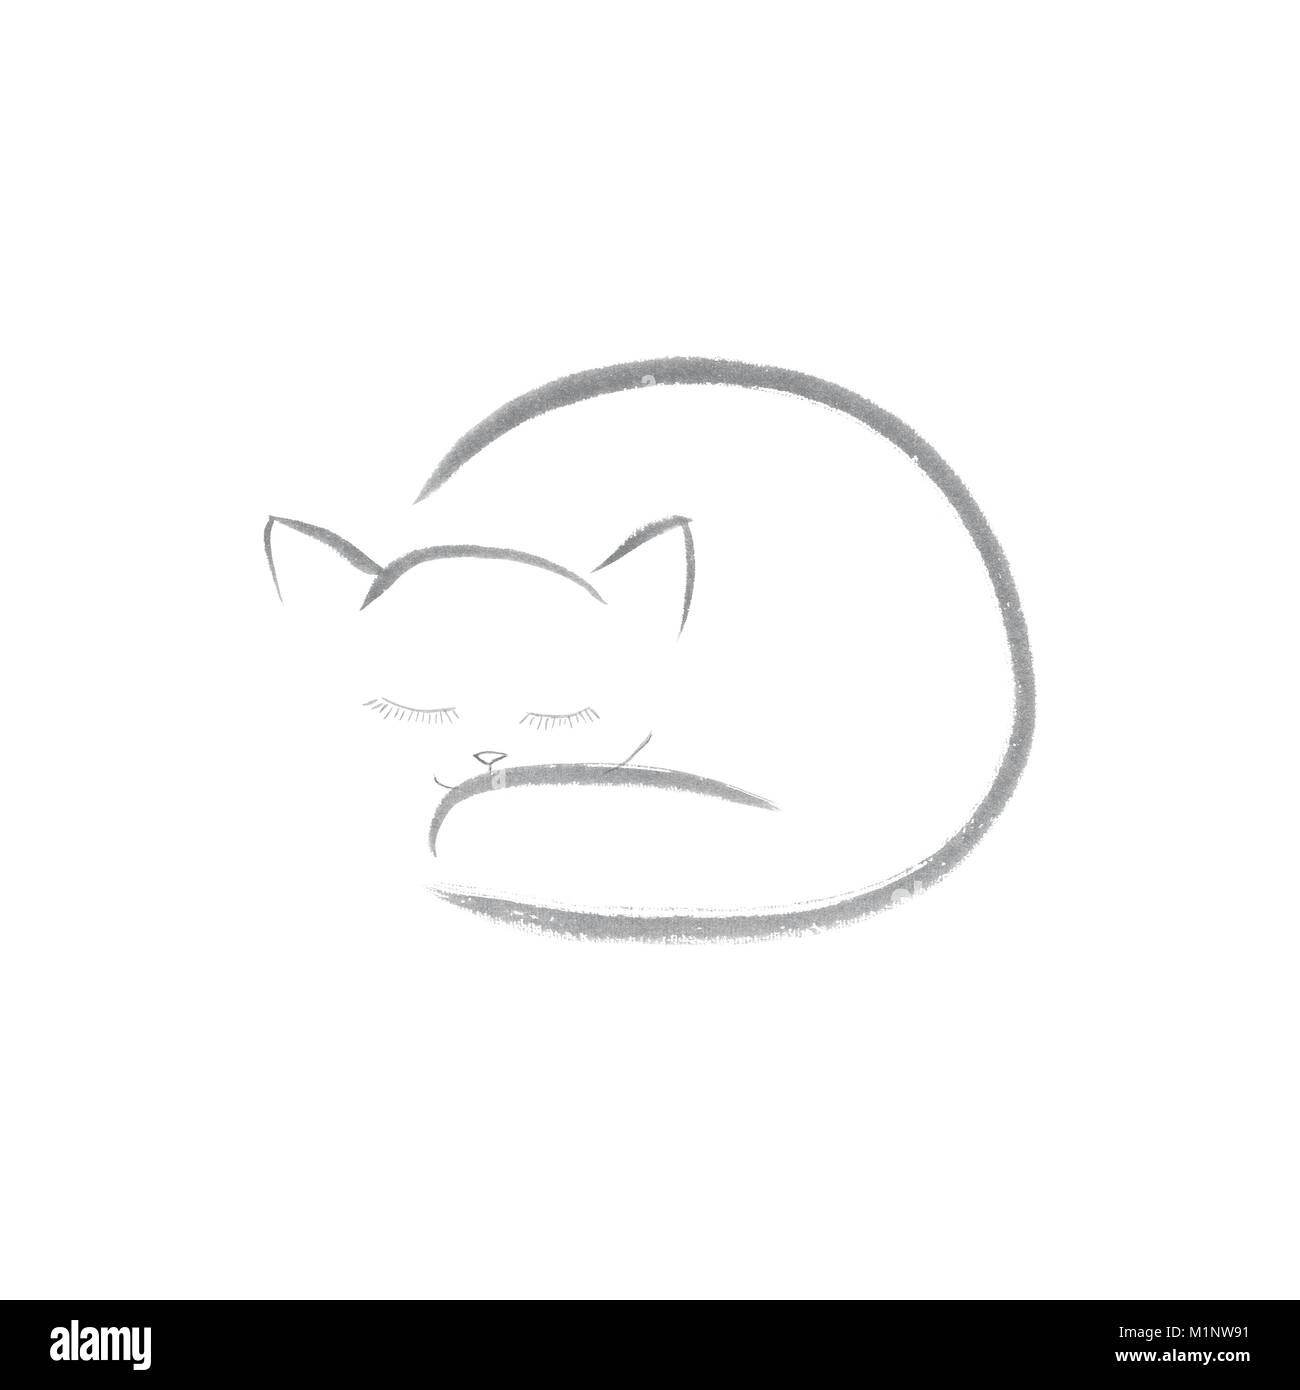 Beautiful artistic design of a cute sleeping kitty cat, ink painting artwork illustration gray on white background. Stock Photo